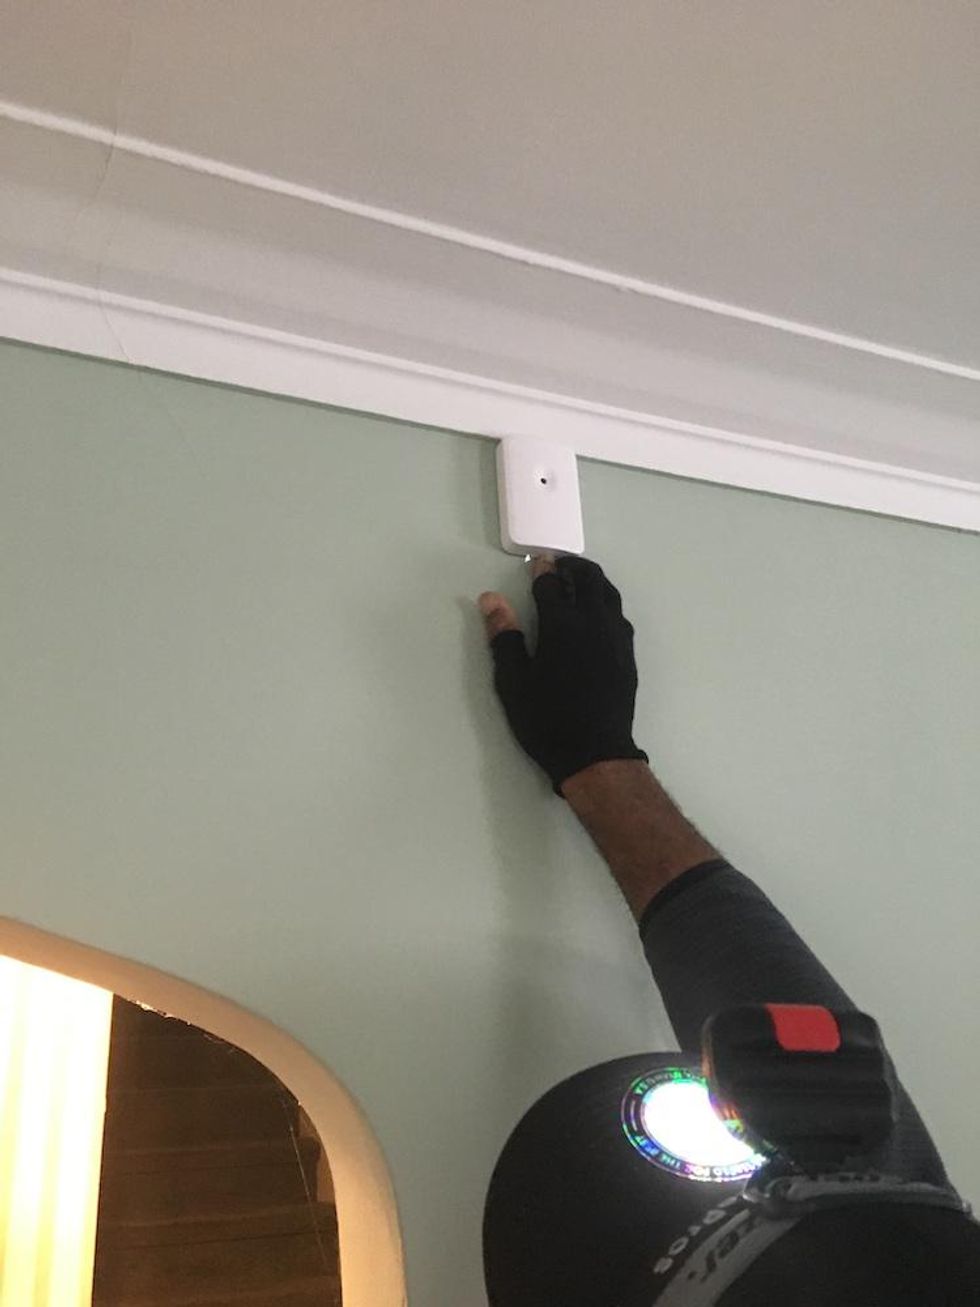 A glass break sensor being installed in a room by a Vivint installer.